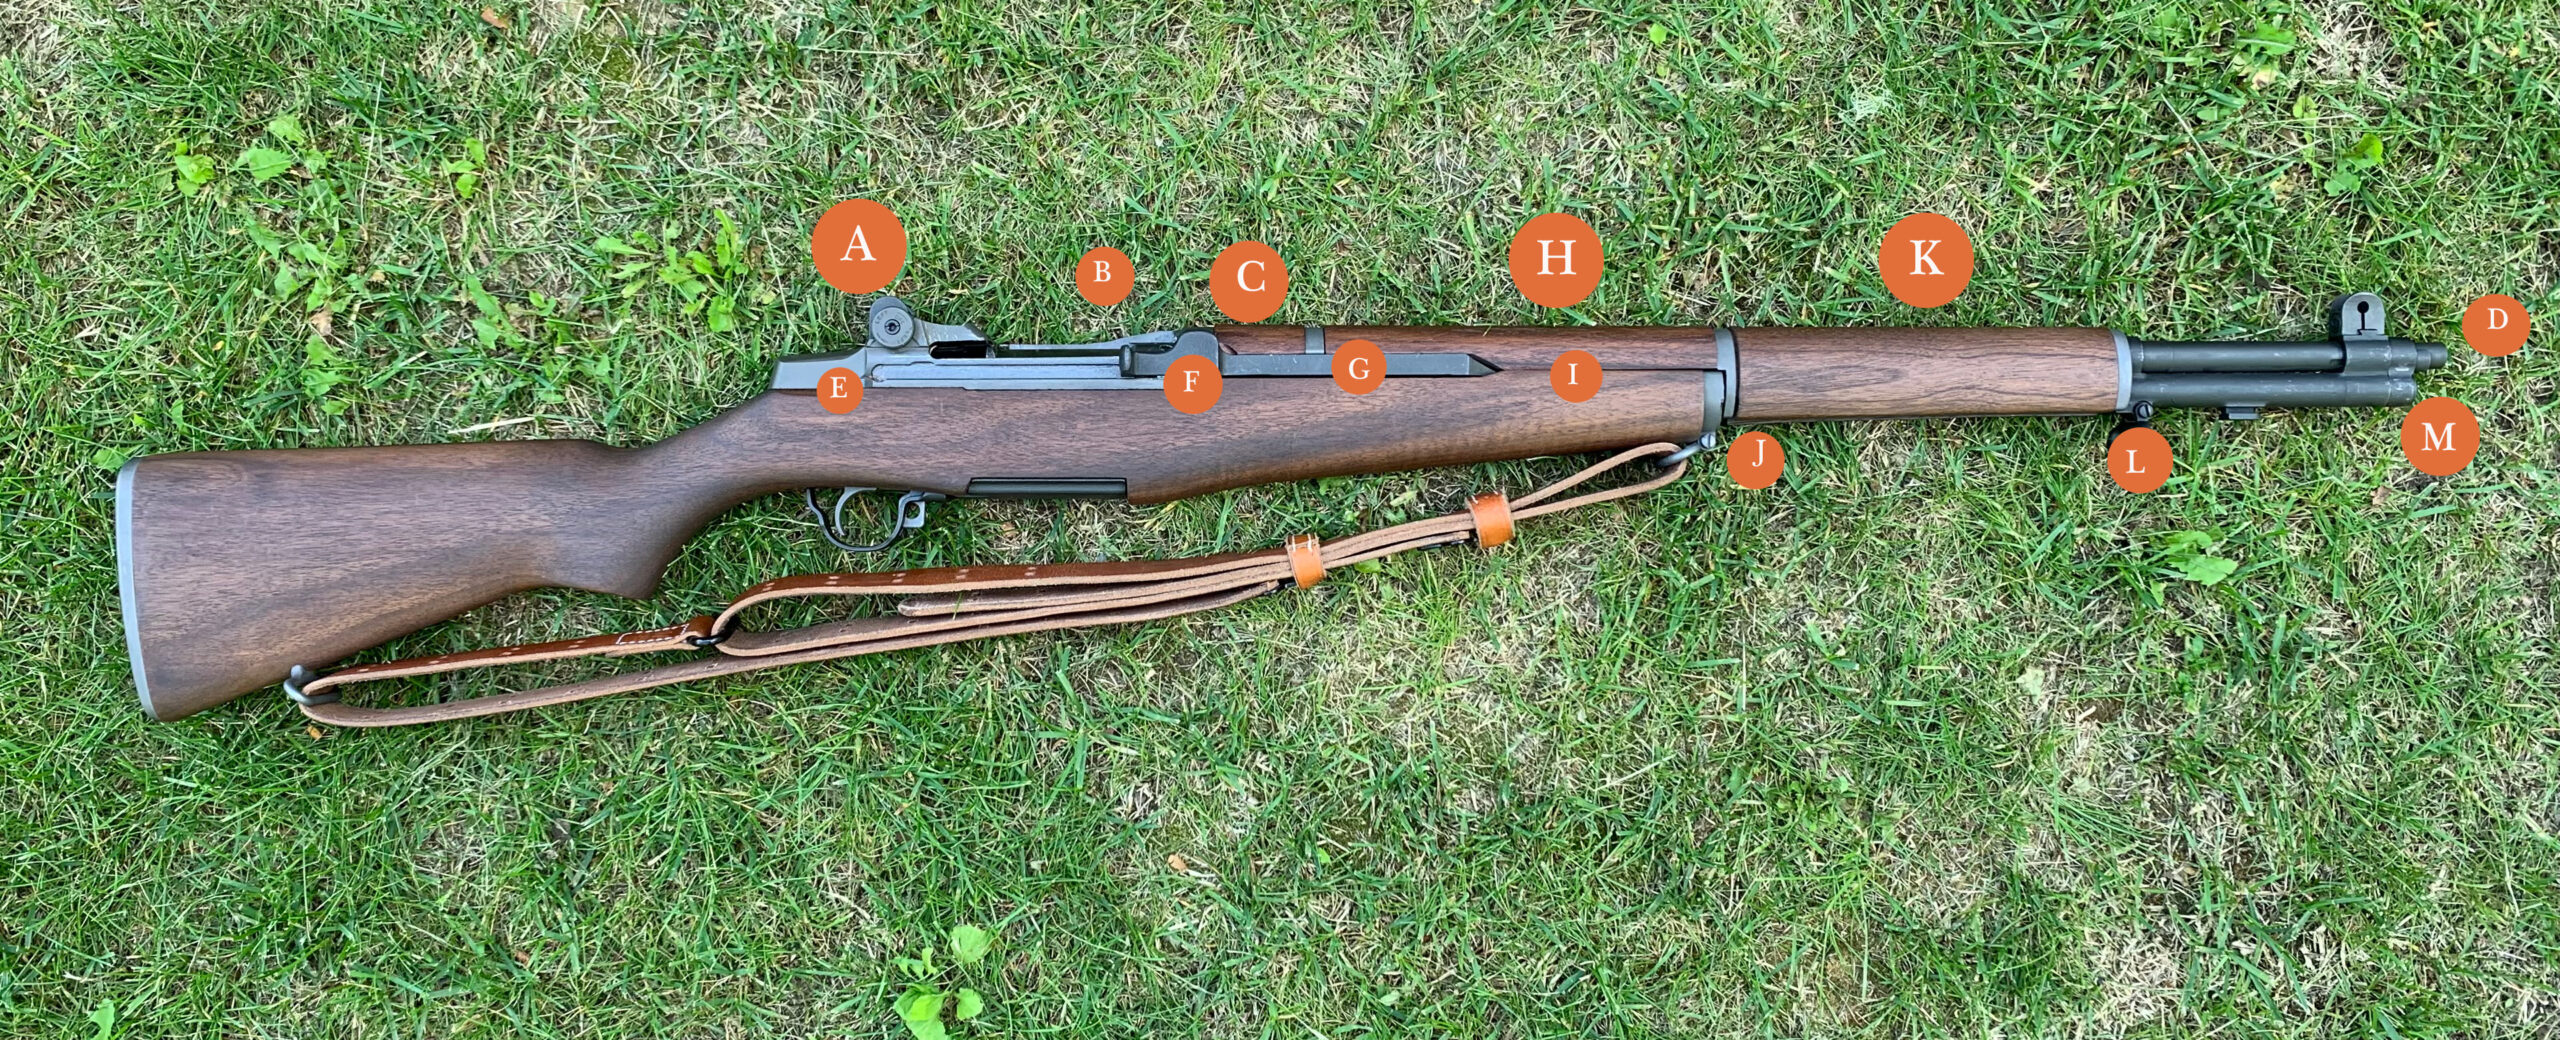 accurized M1 Garand features